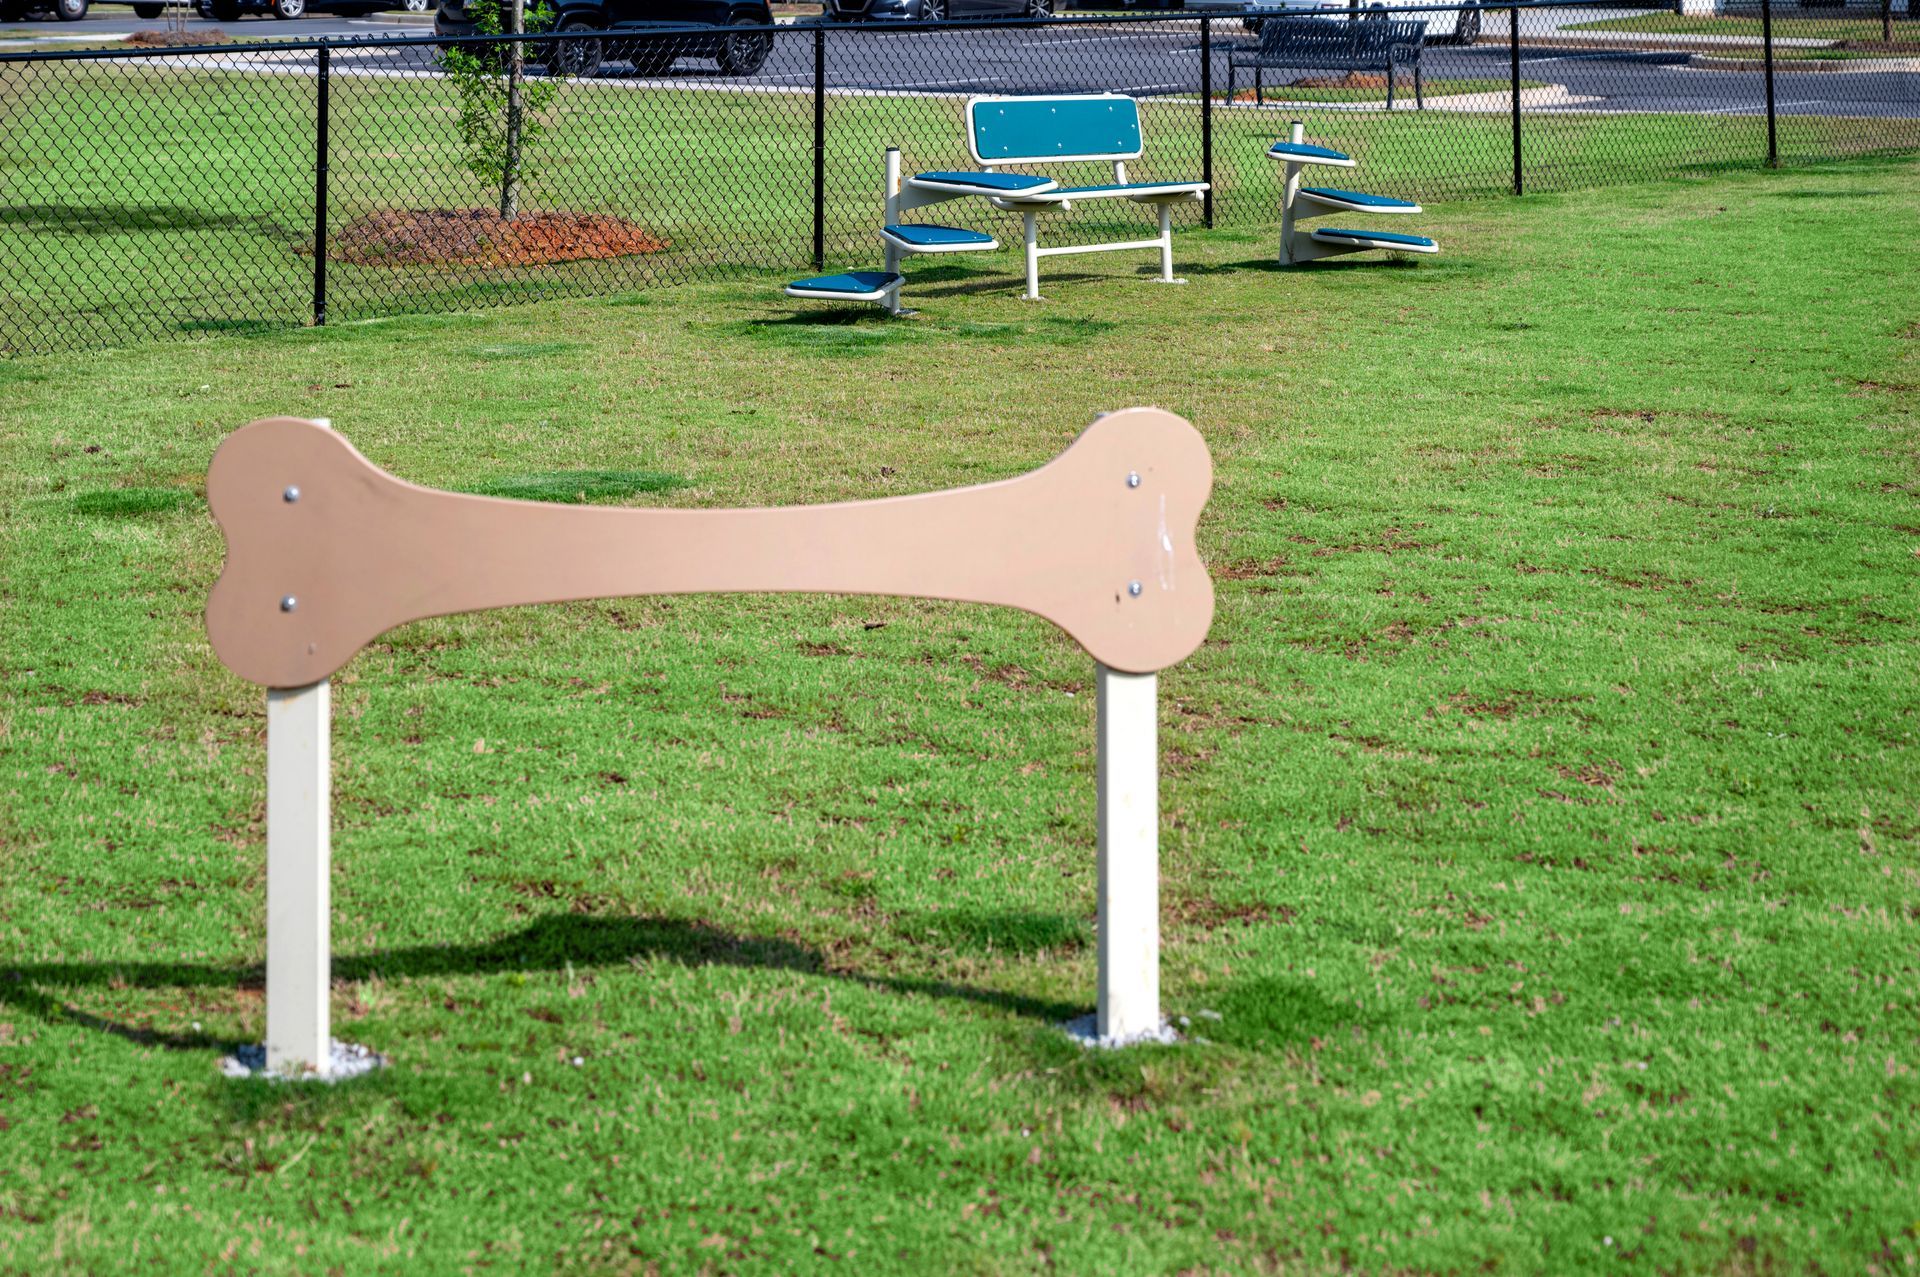 A dog park with a large bone in the middle of the grass.